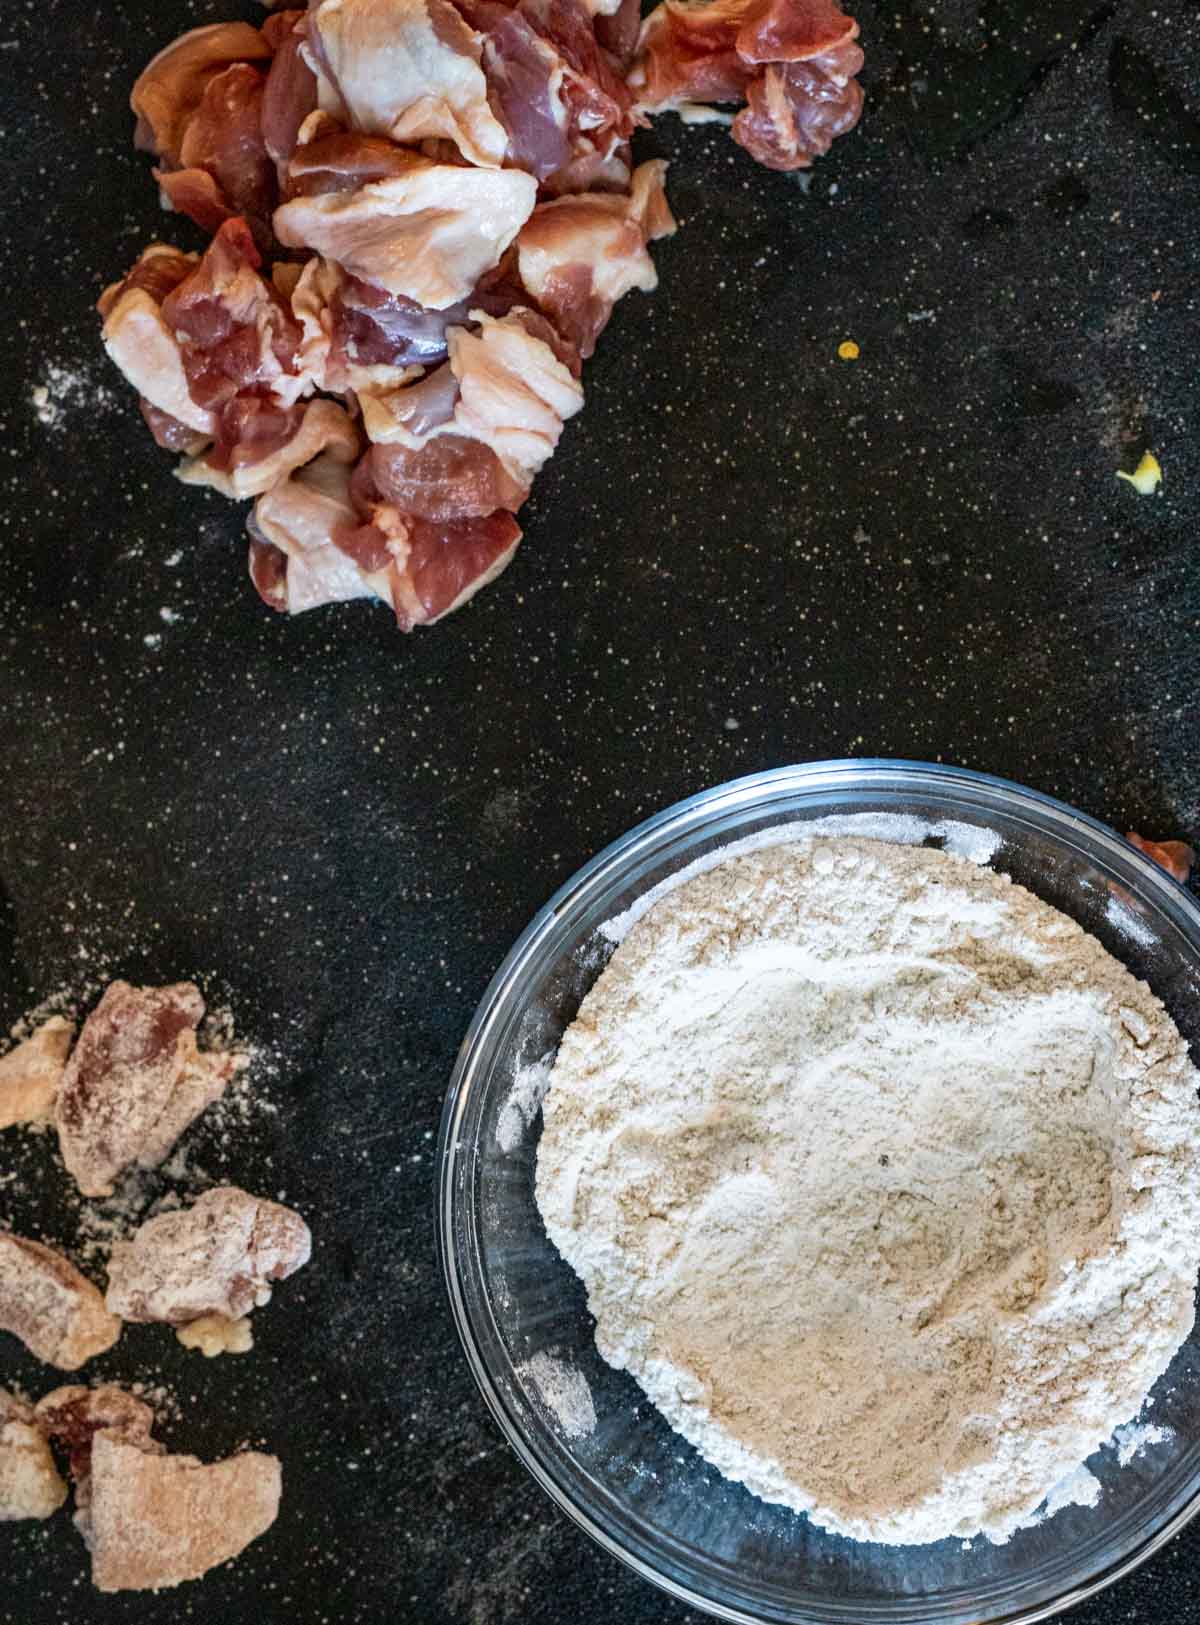 Duck pieces on a work surface with a bowl of the flour mixture and some floured duck bites on the side.